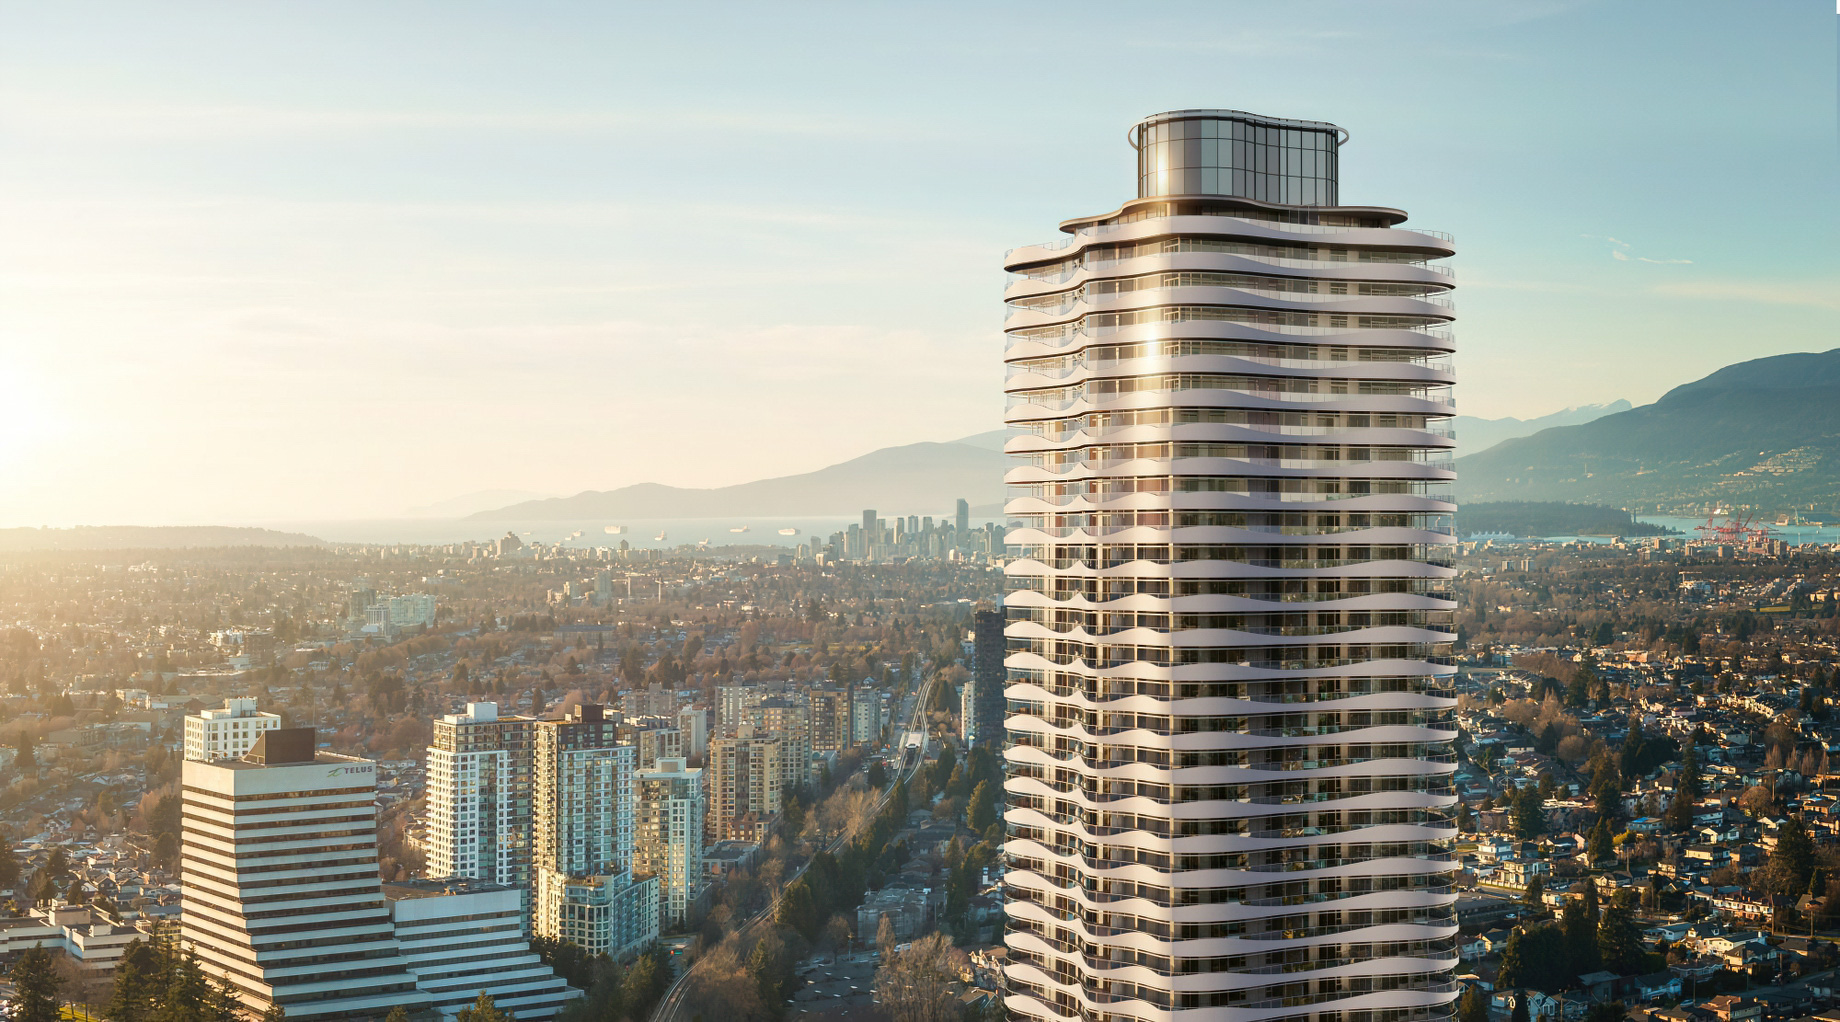 Modern Architecture Reviving Old-World Elegance – GREENHOUSE Brings Sophisticated Luxury Condo Living to Burnaby’s Metrotown